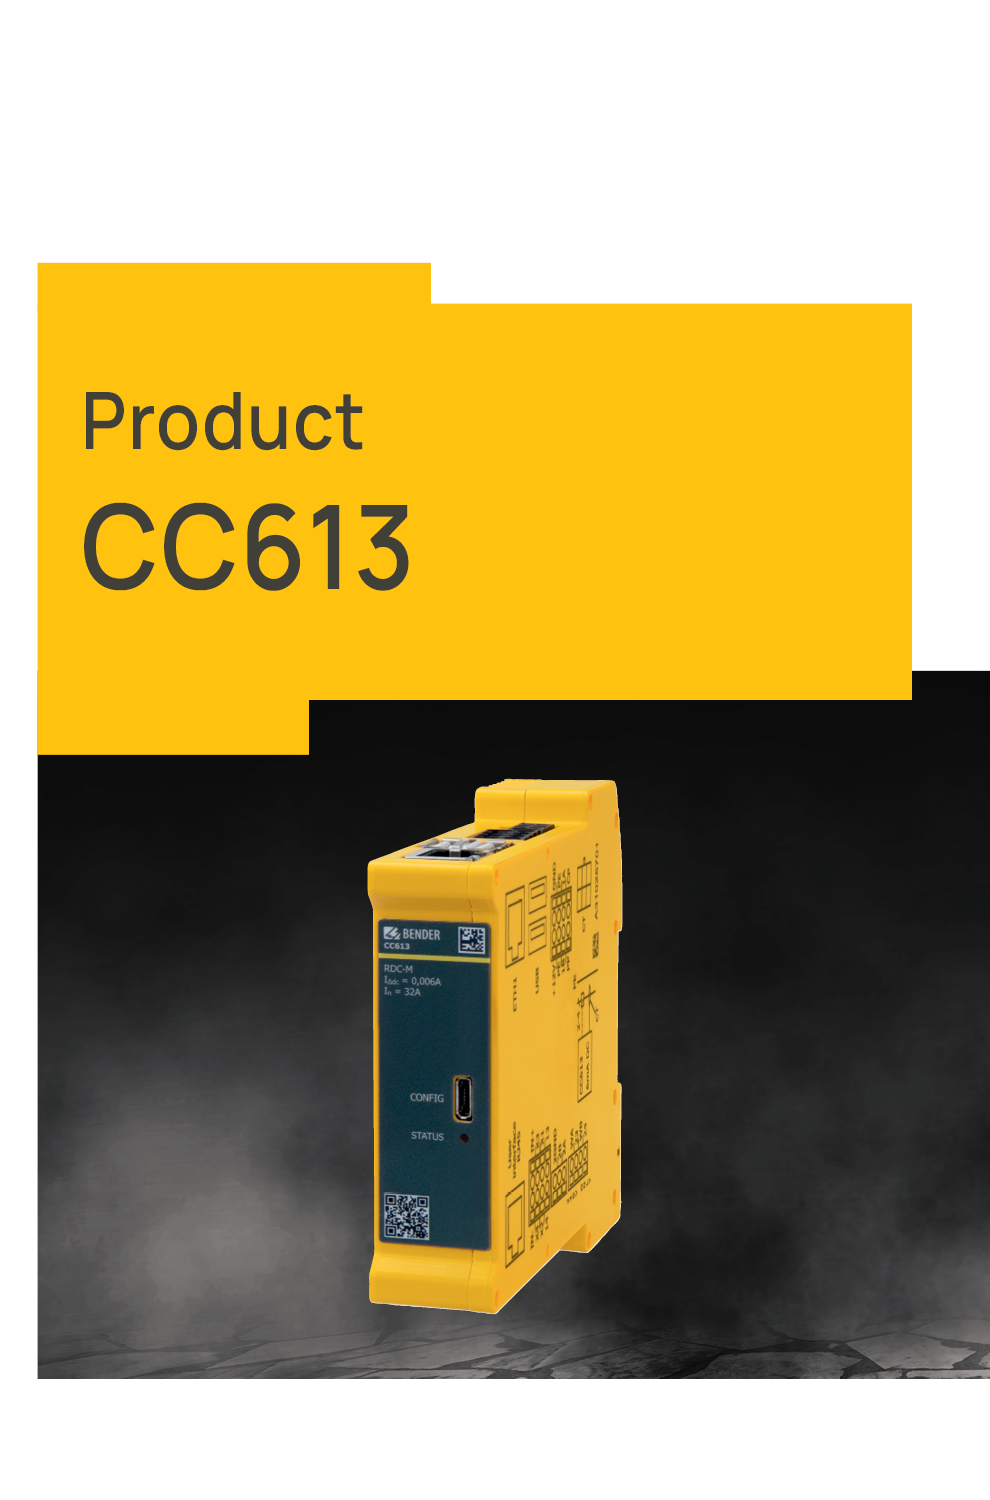 CC613 Product Flyer